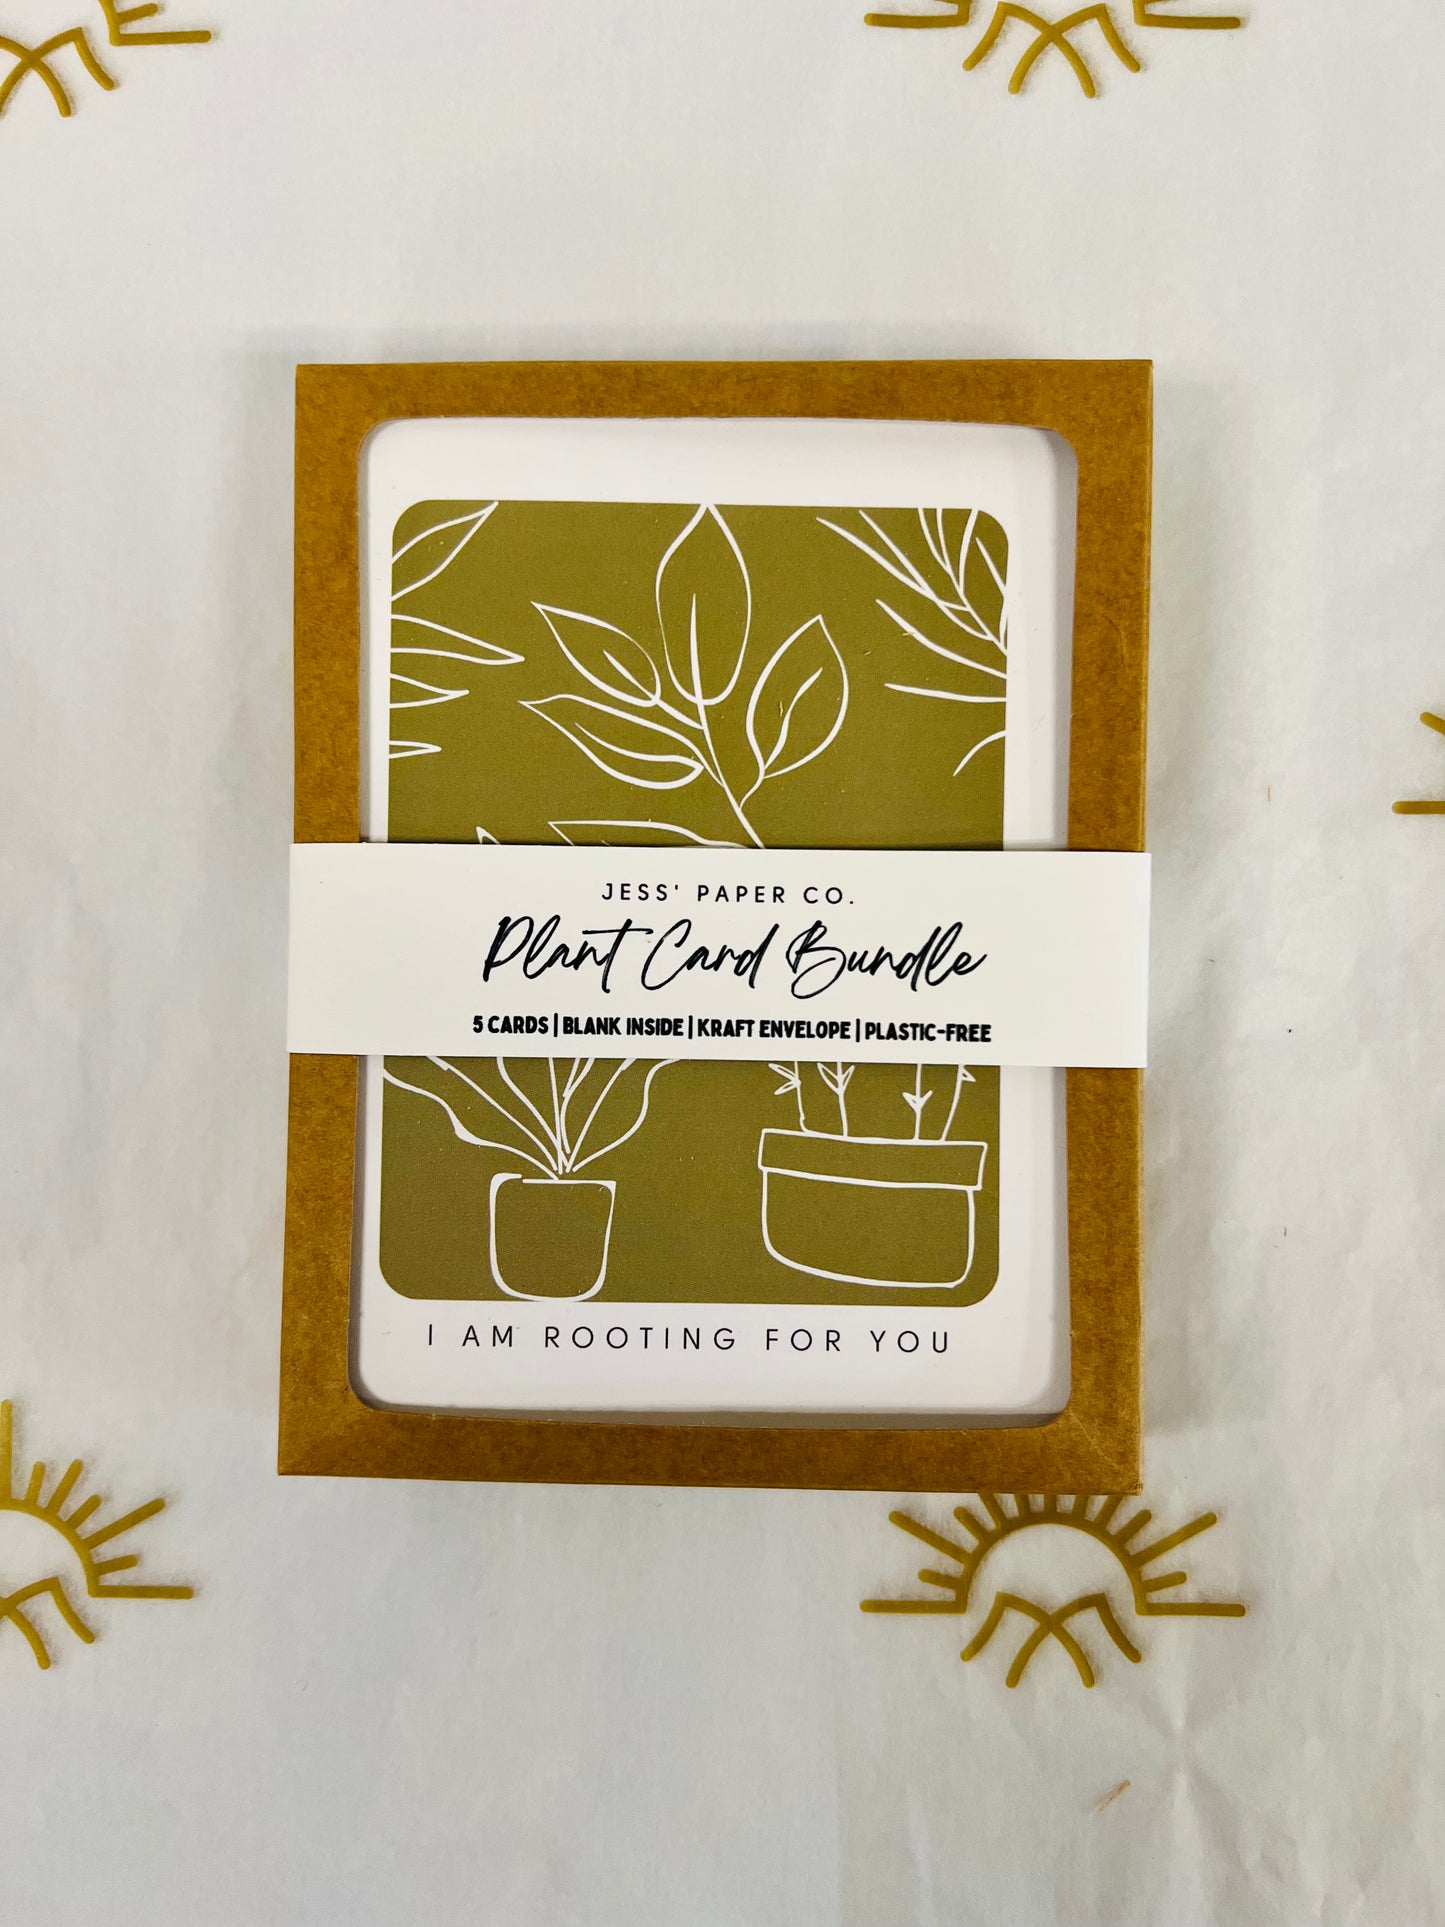 Plant Card Pack Home Goods Jess' Paper Co. Rooting for You  